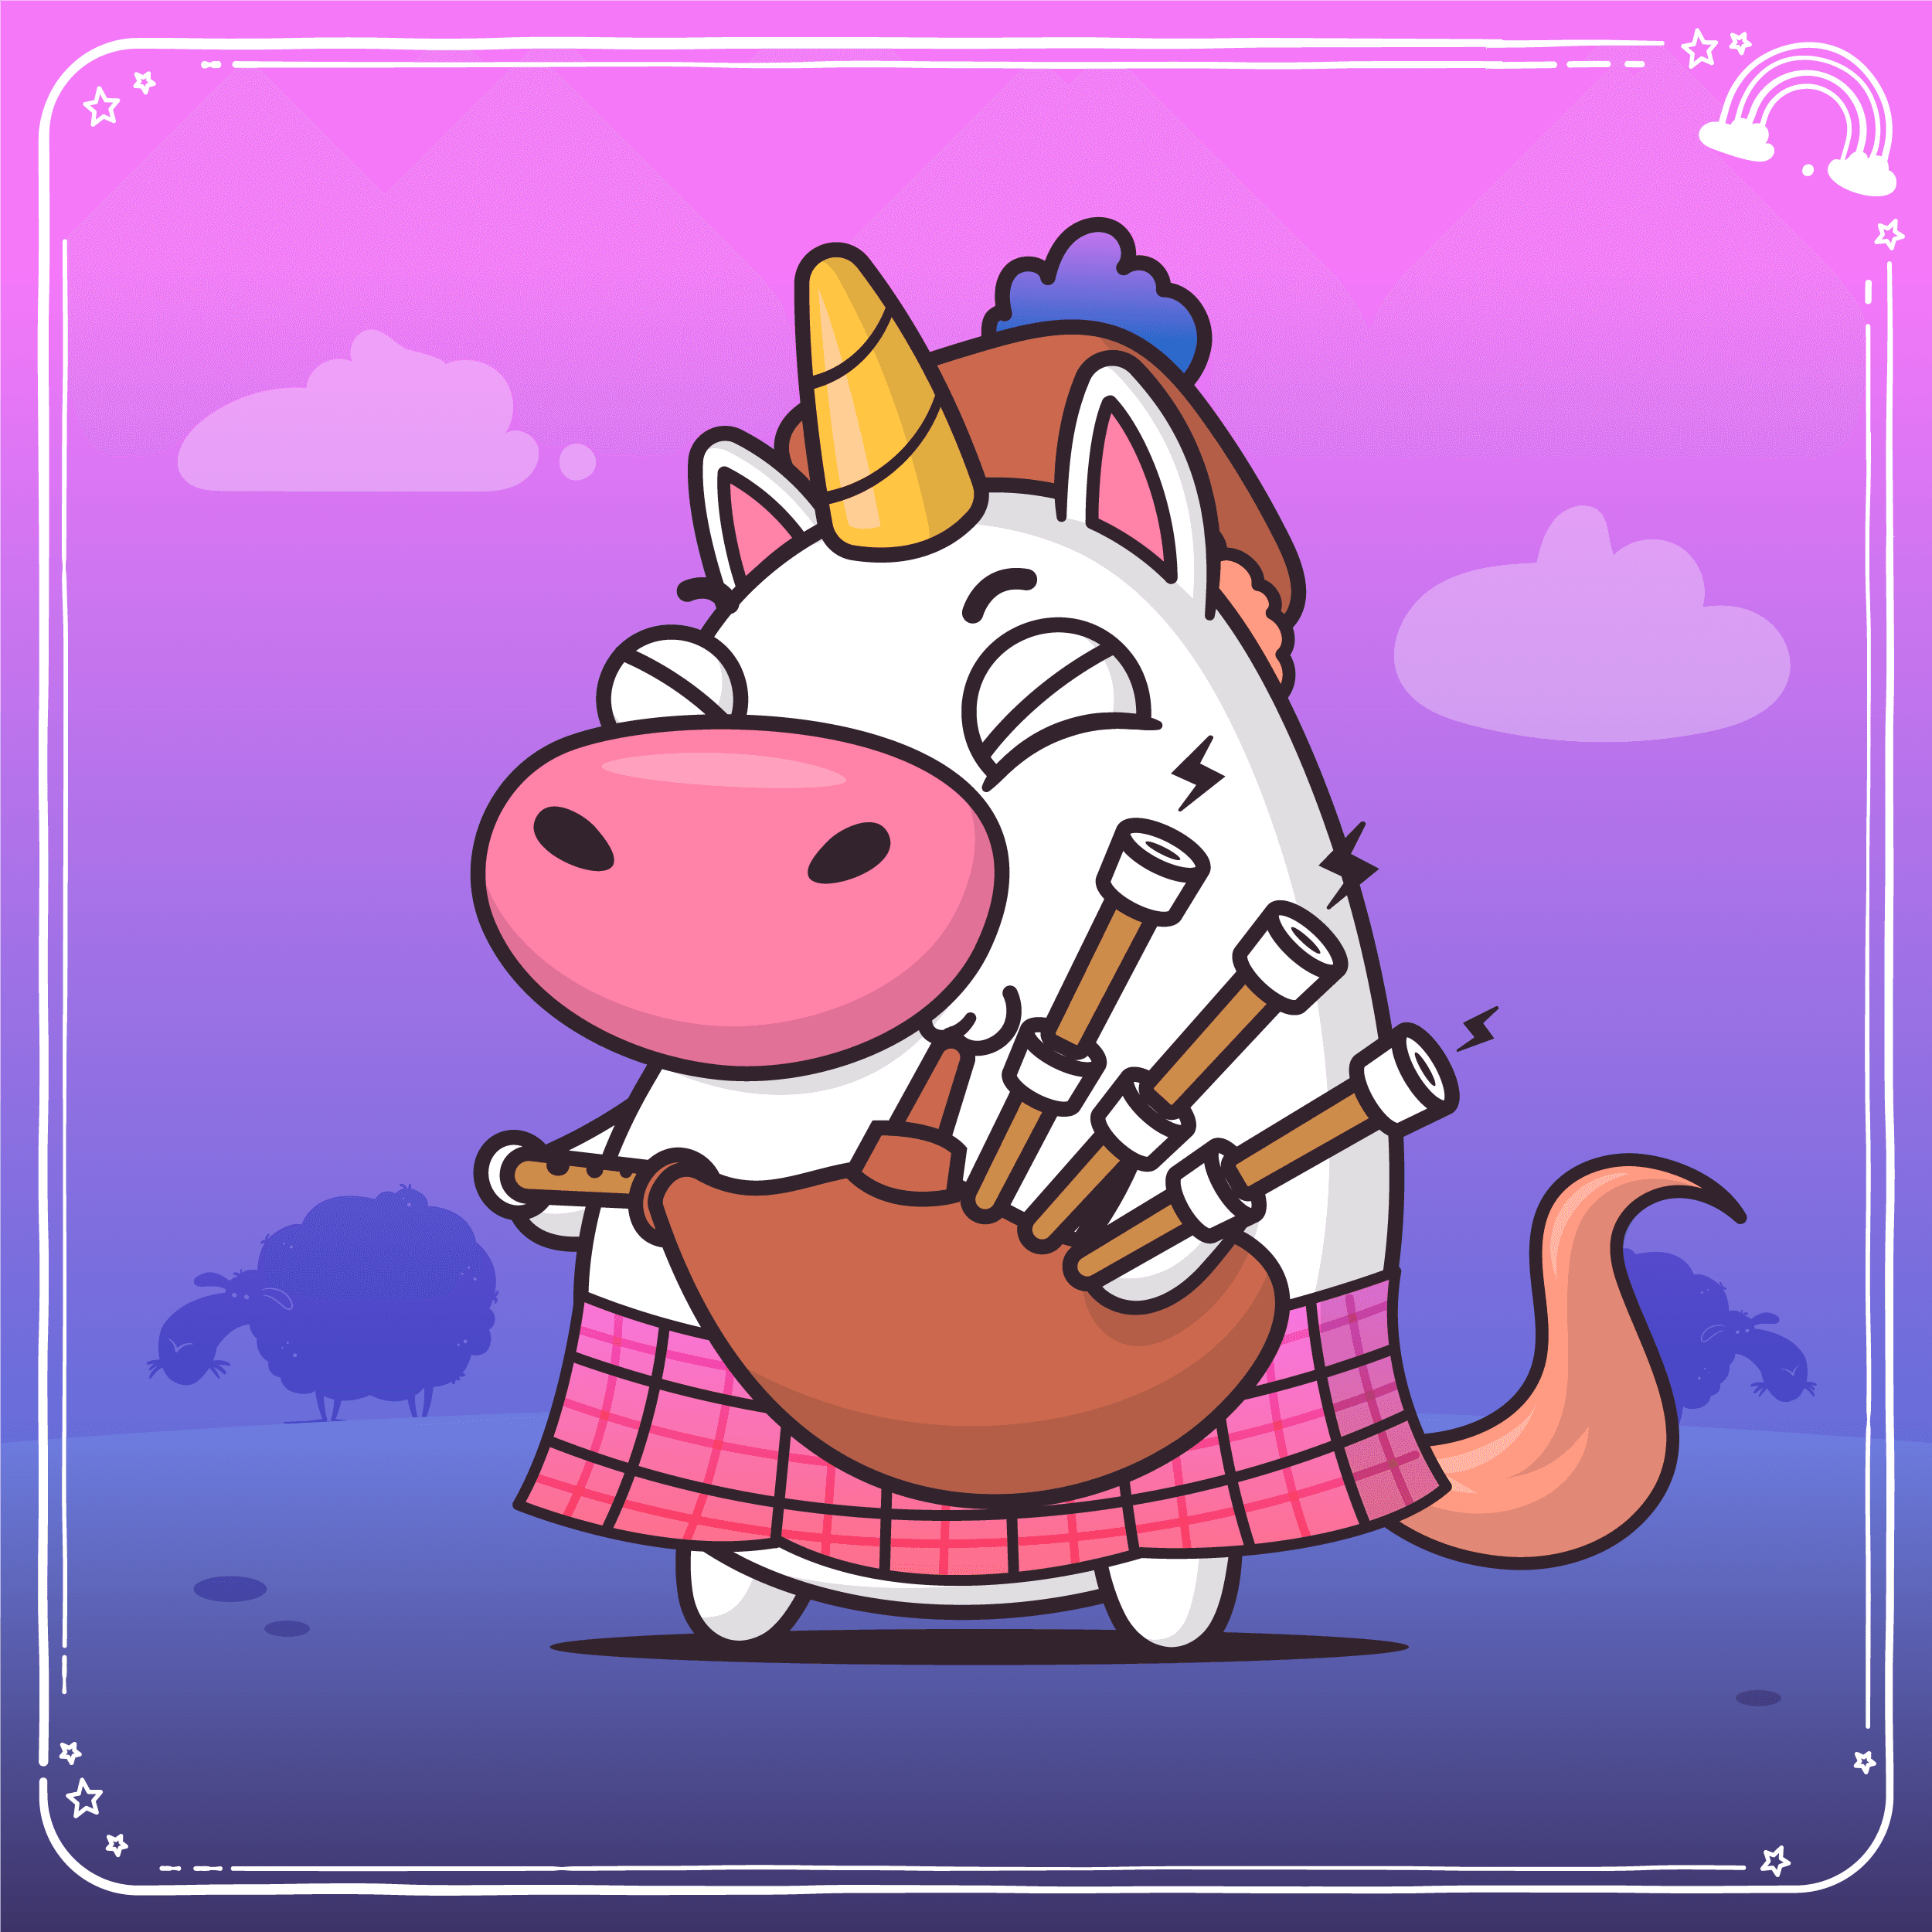 #8 - Bagpipe Saucy